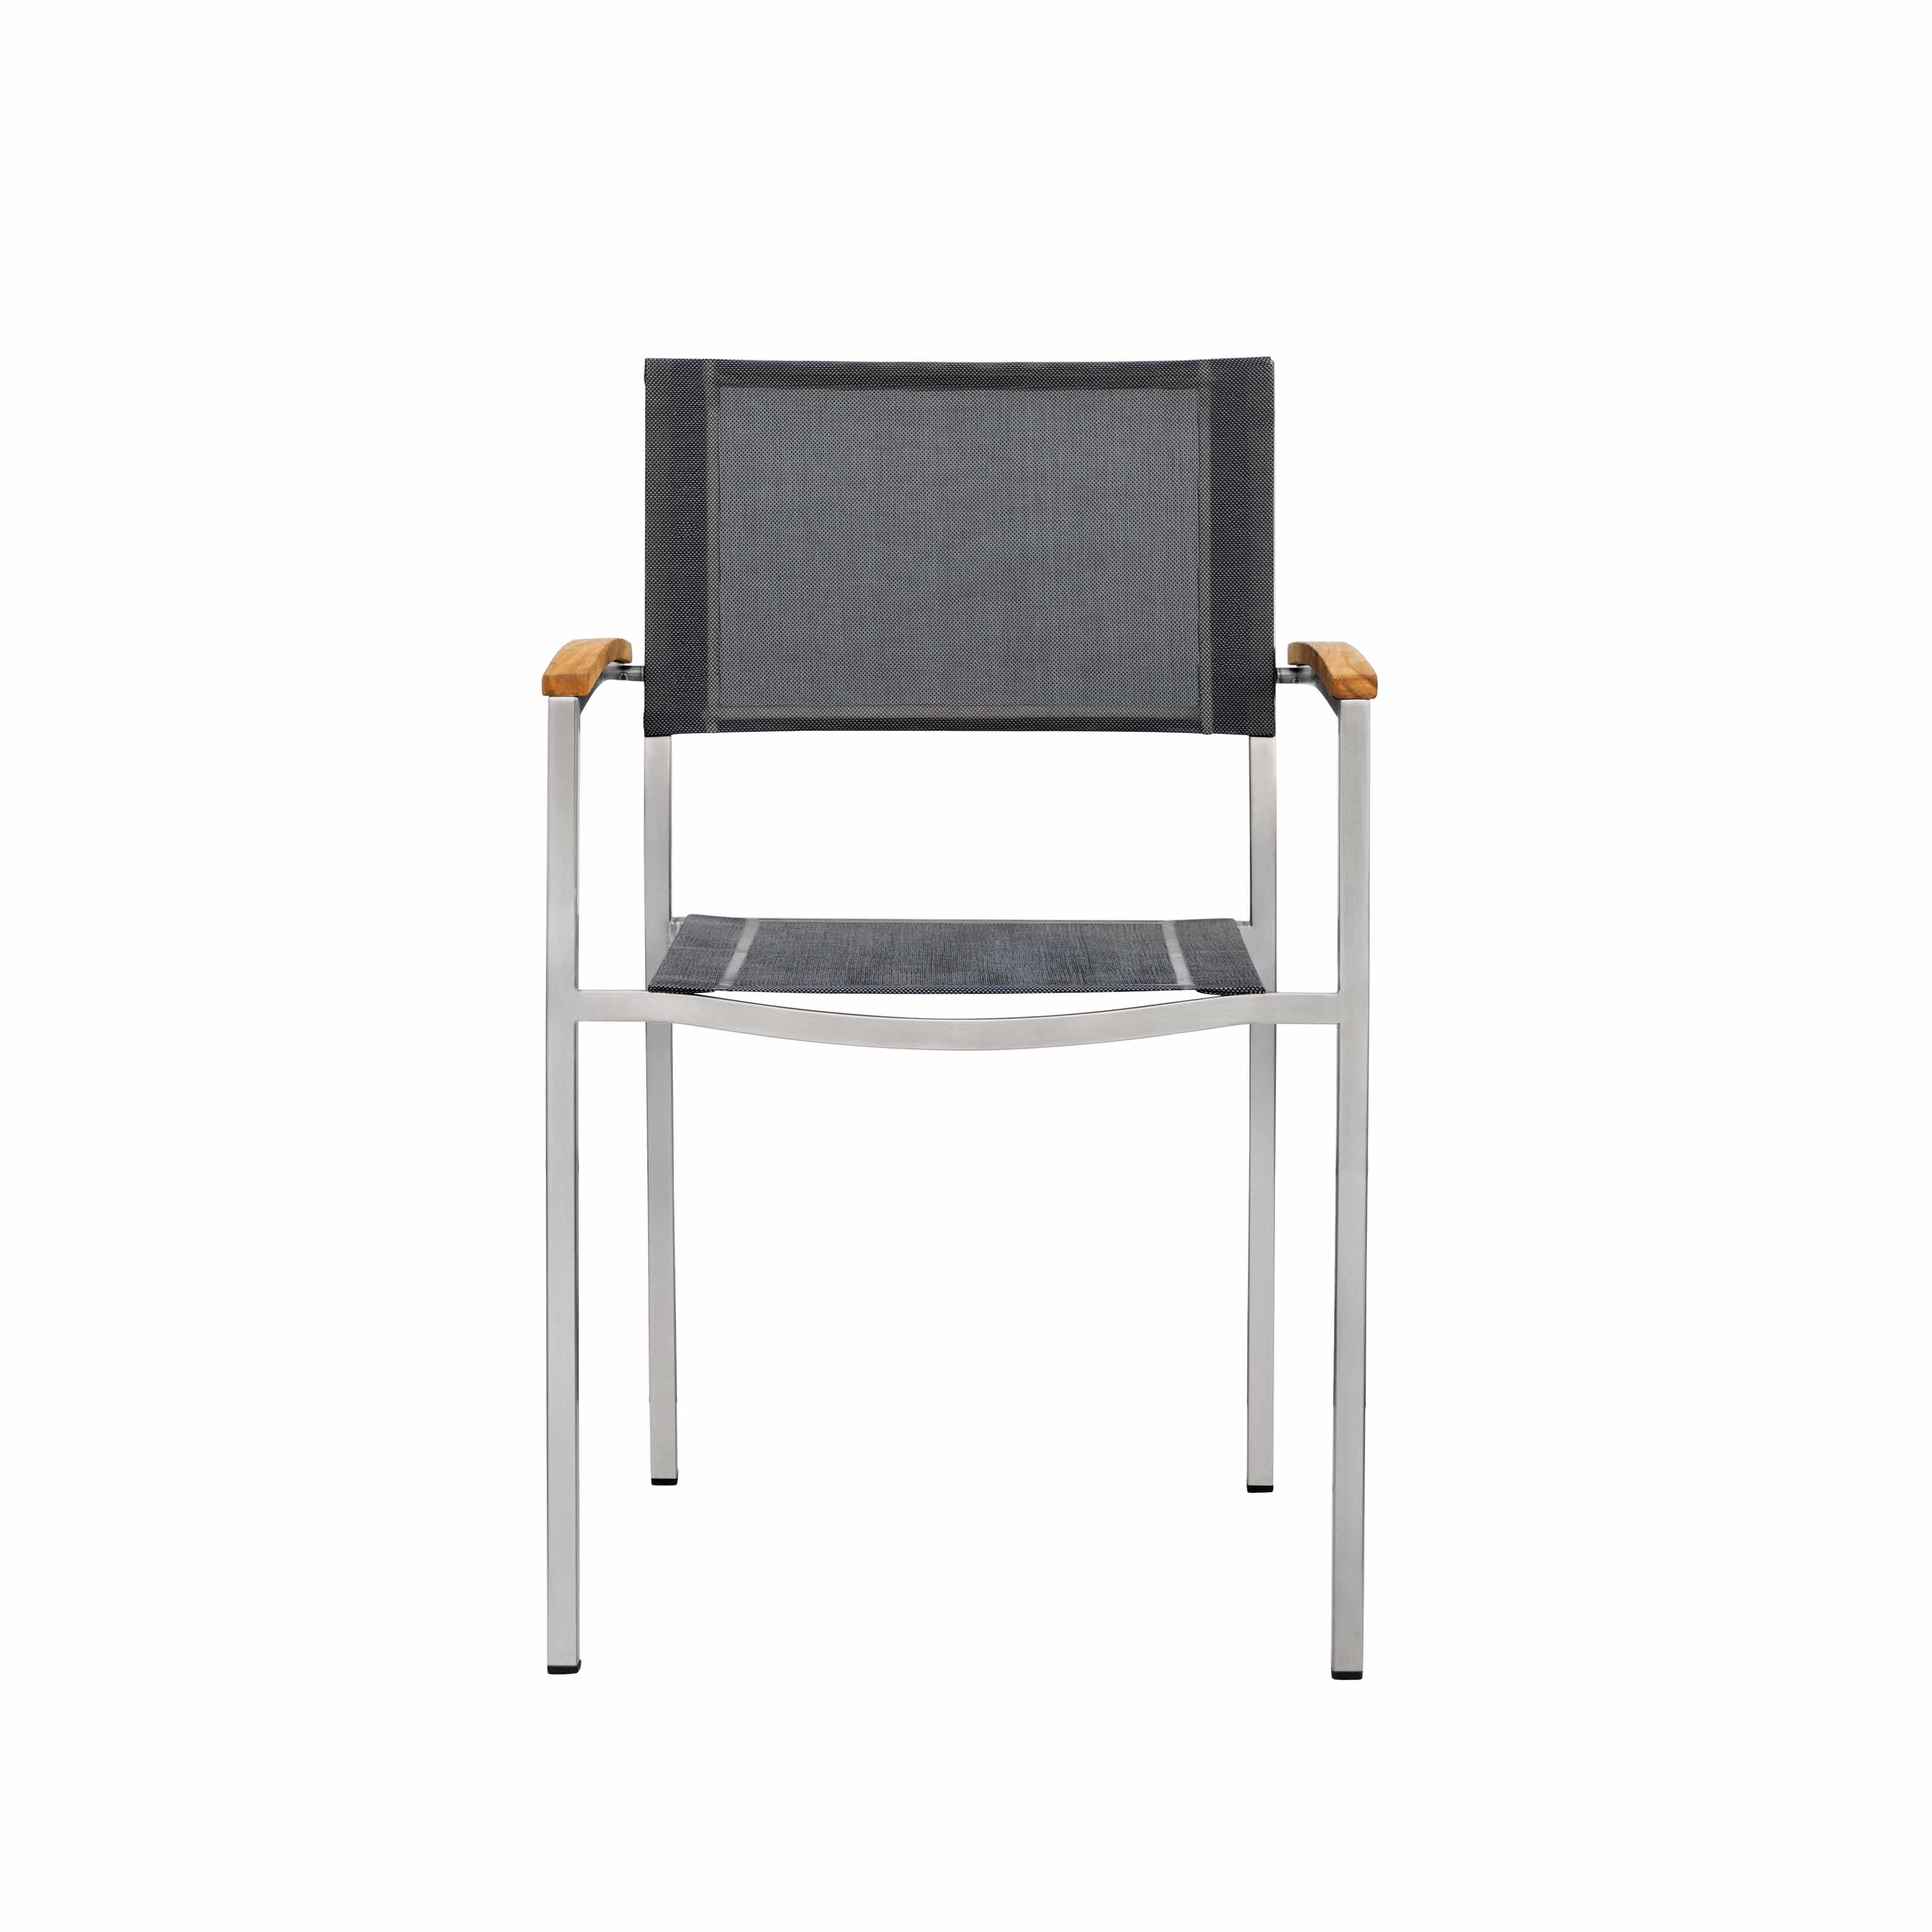 TL2021 Hills dining chair S3